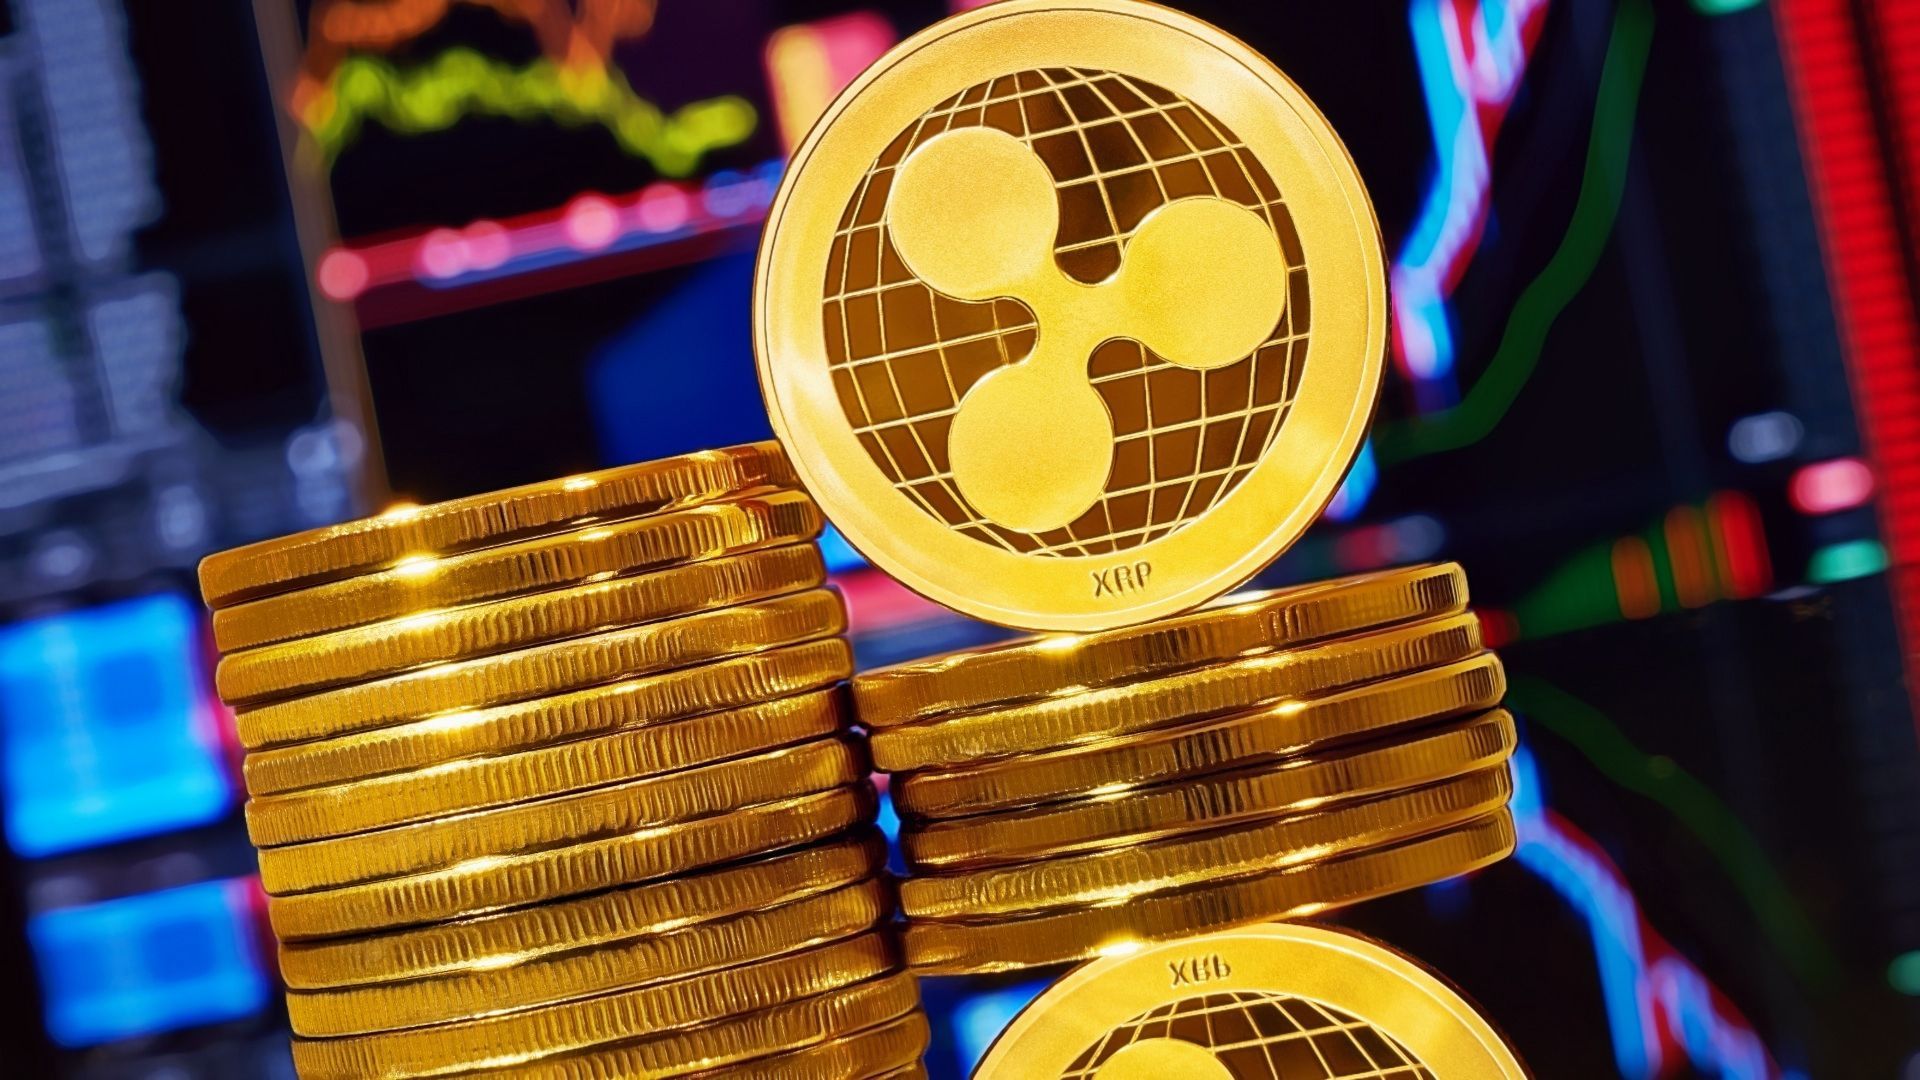 RIPPLE PRICE ANALYSIS & PREDICTION (July 2) – XRP Bounces Sharply After Testing This Support Line, Can it Resume Bullish? thumbnail